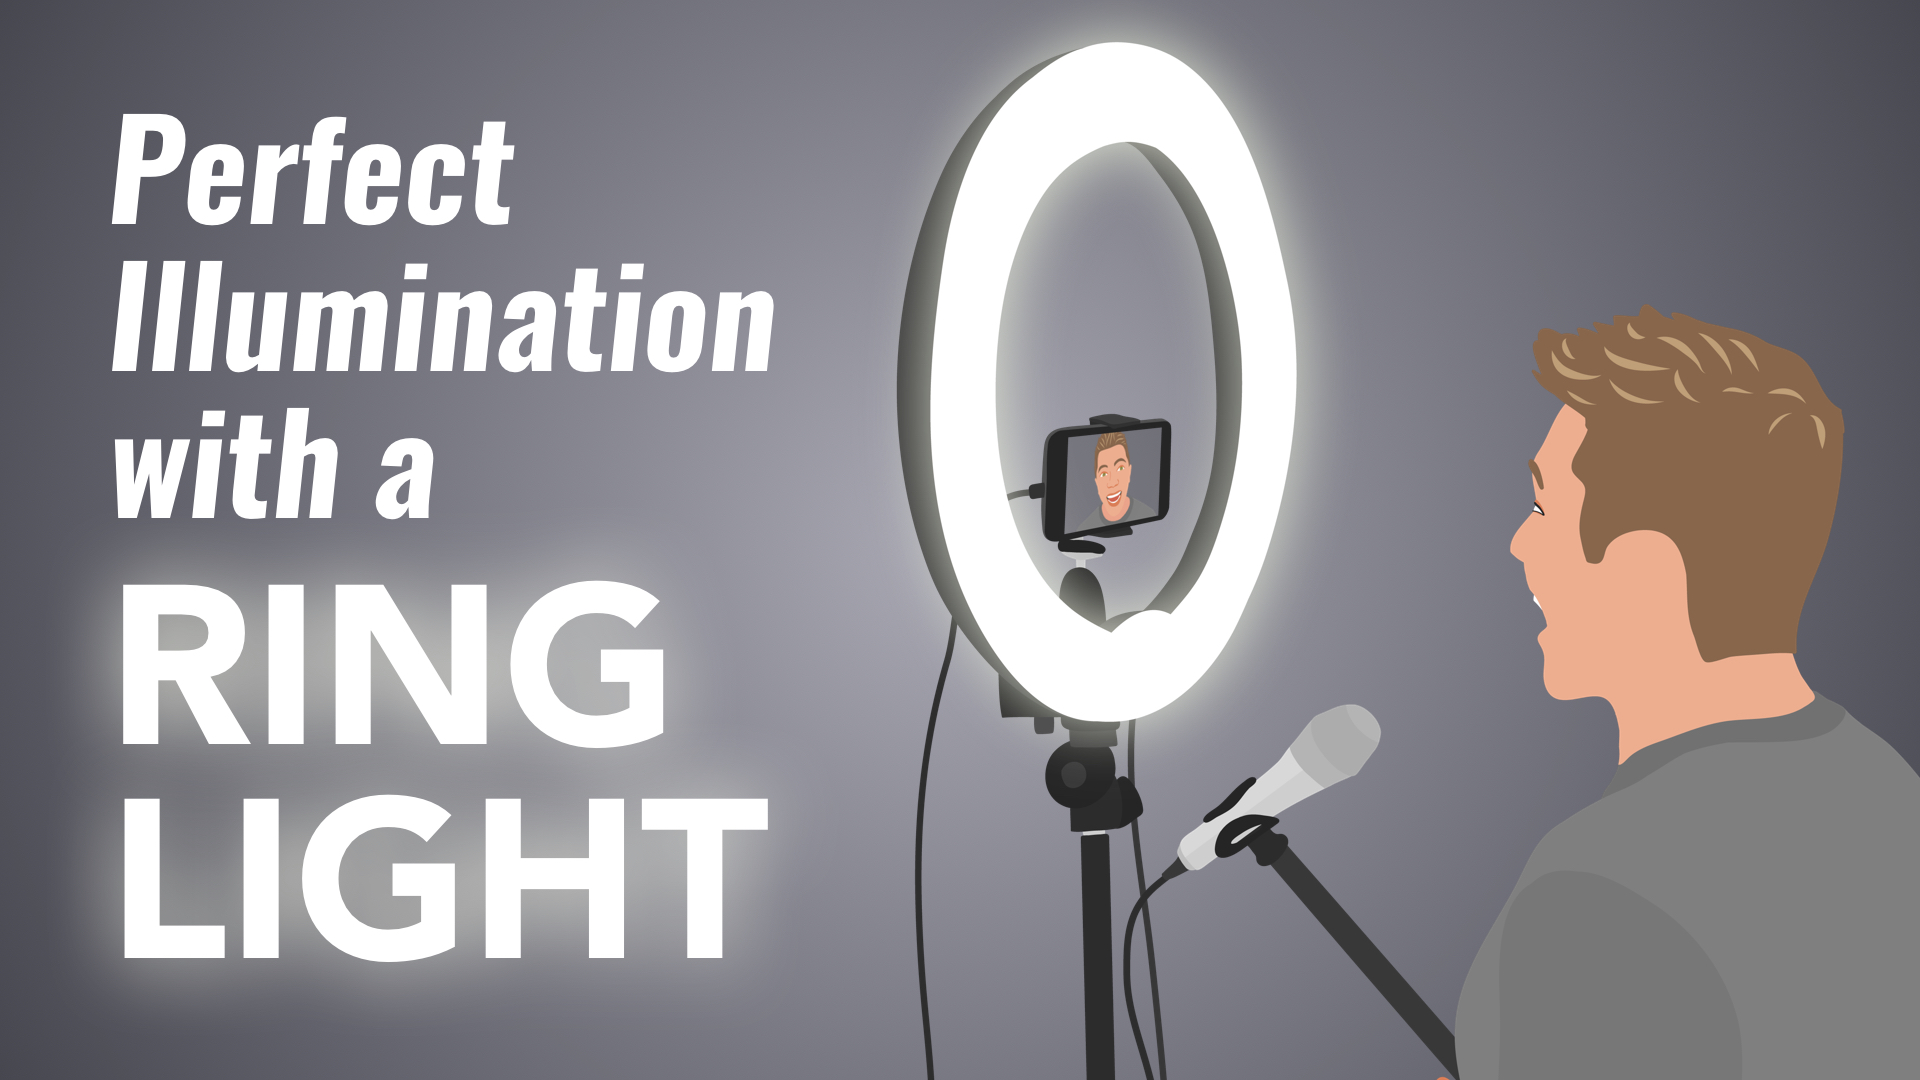 Perfect illumination with a ring light â learning in hand with tony vincent